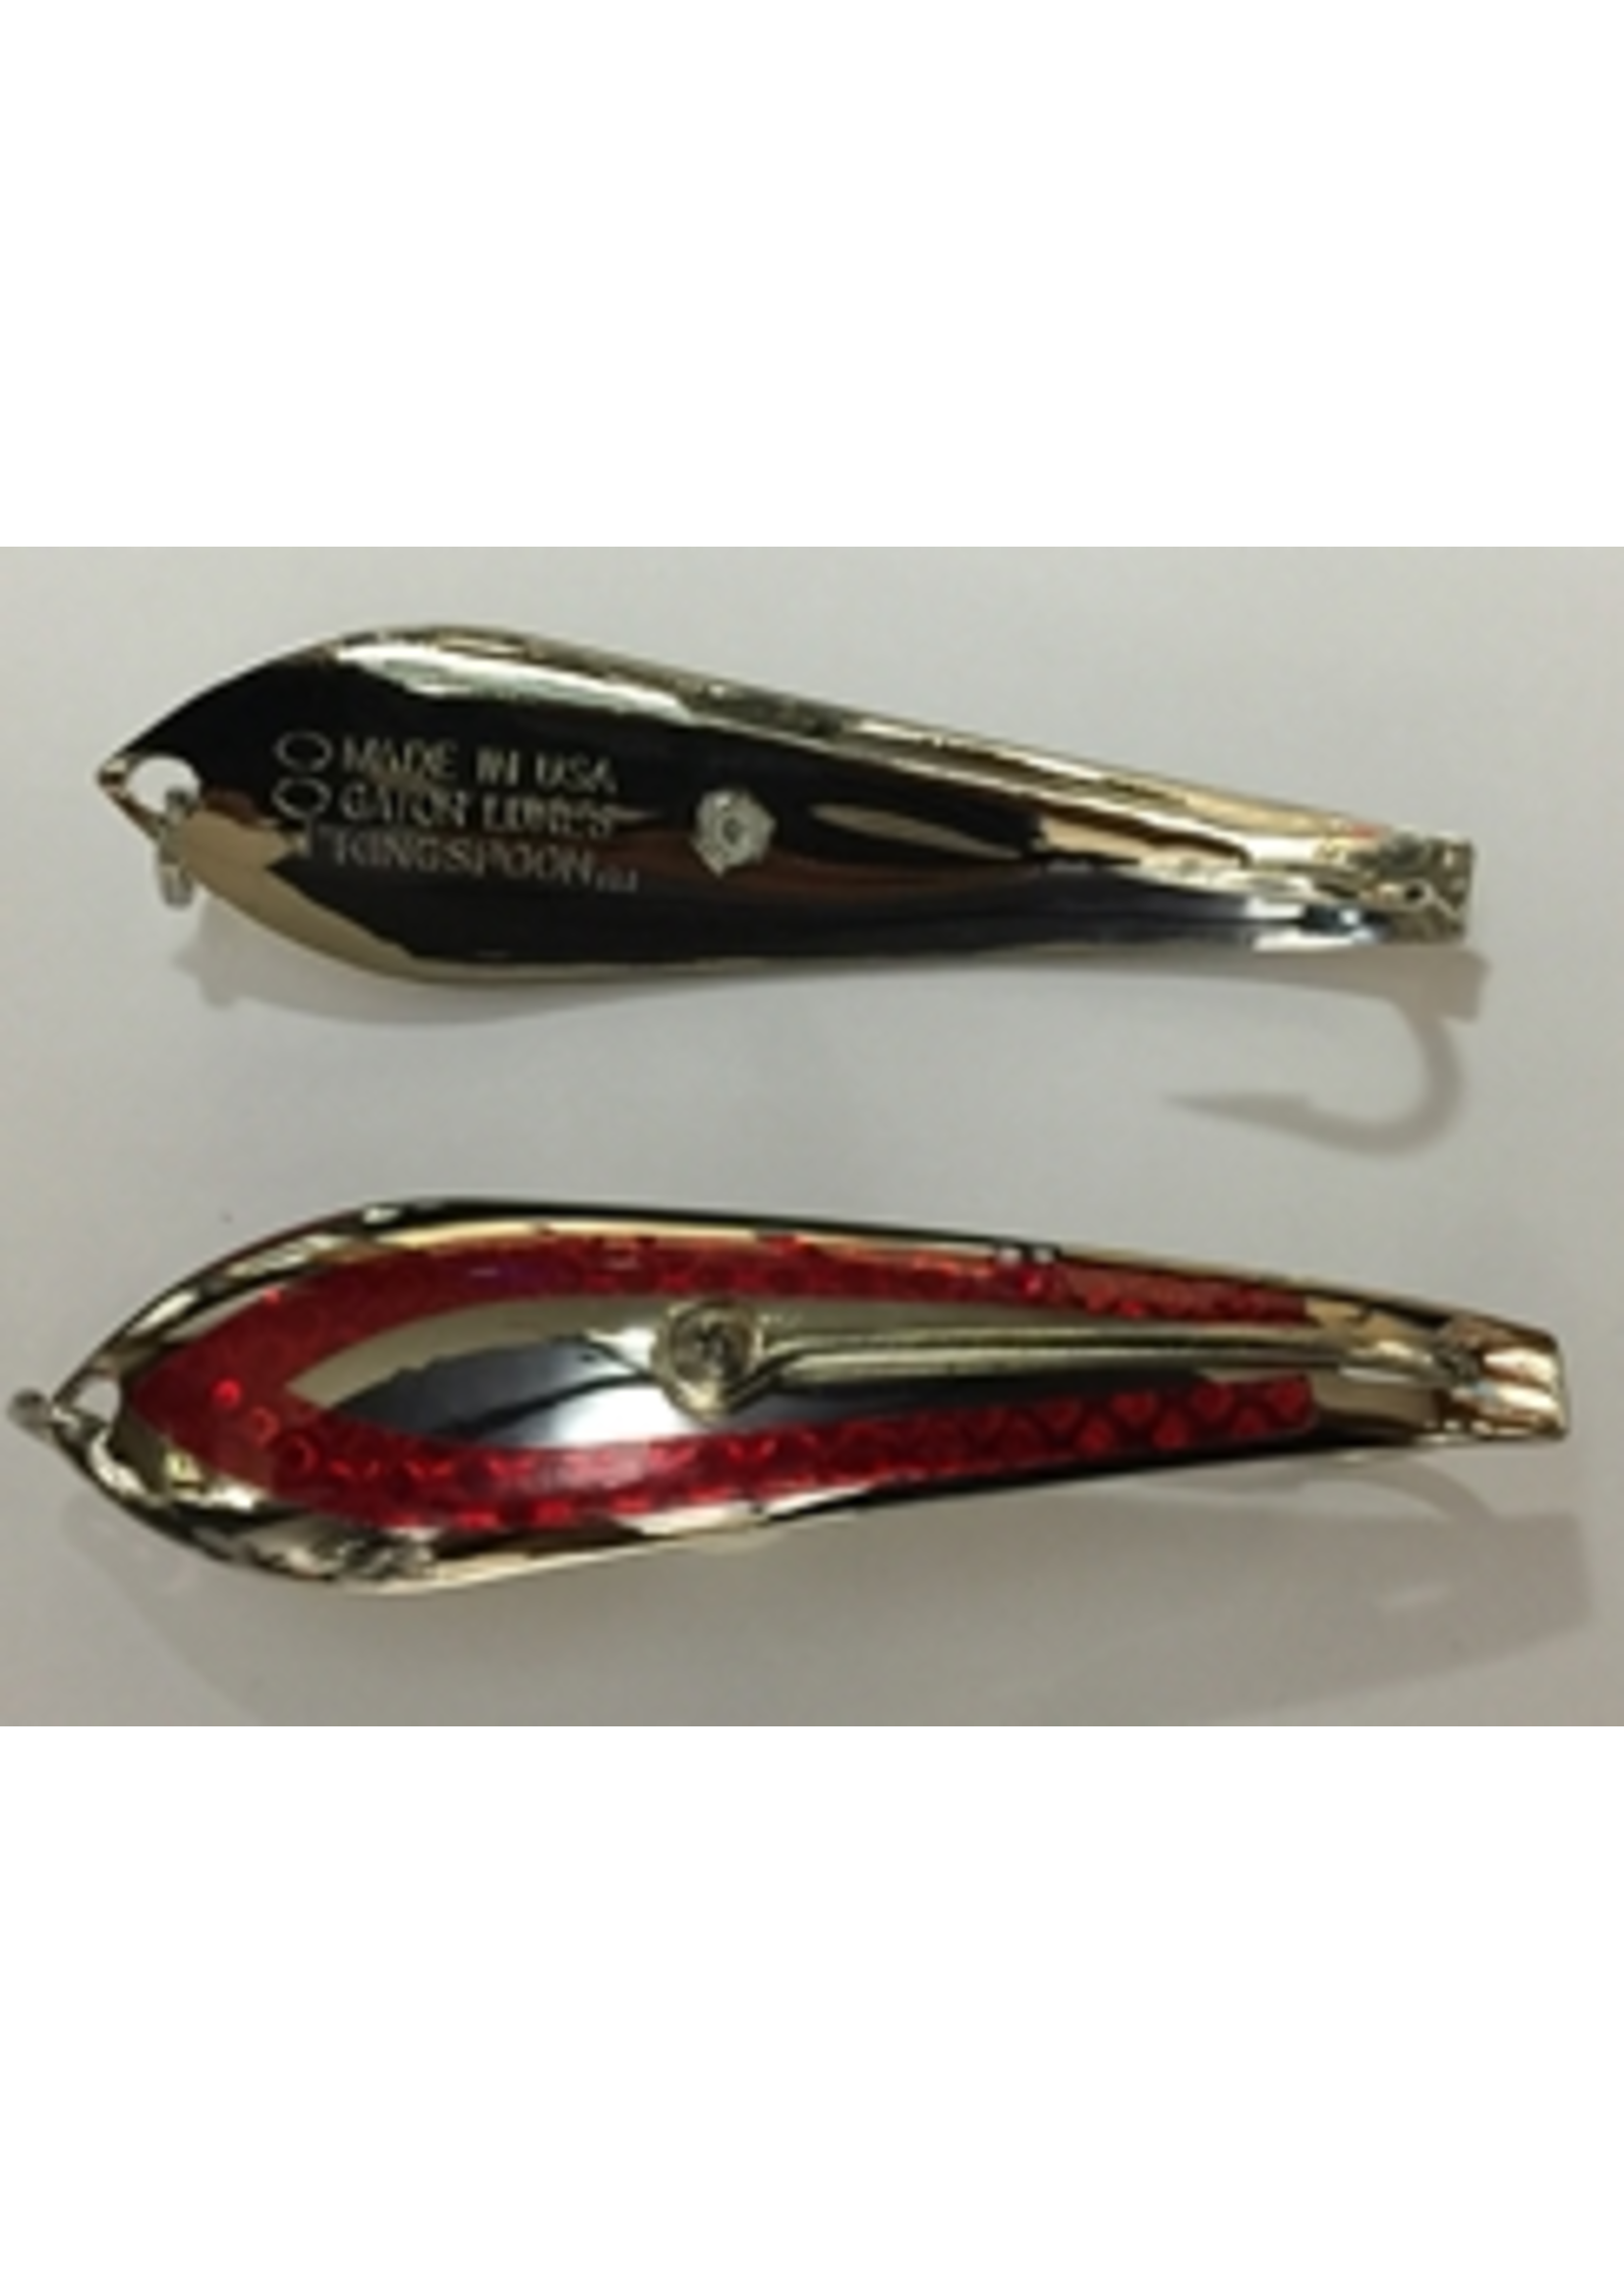 Gator Lures Kingspoon - 400 Red